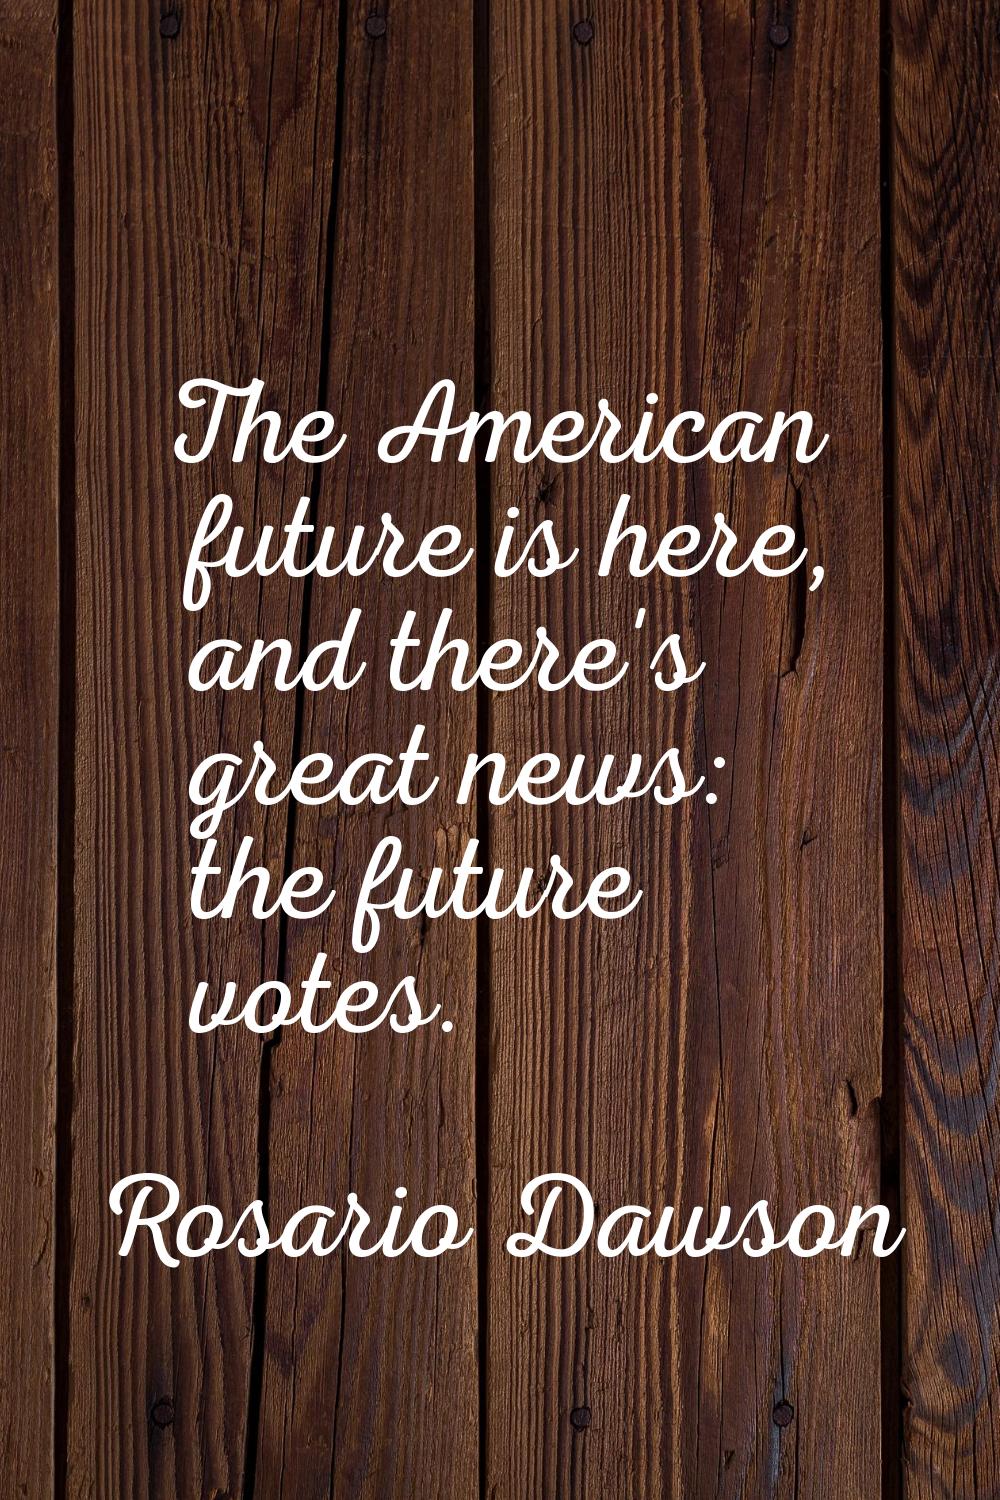 The American future is here, and there's great news: the future votes.